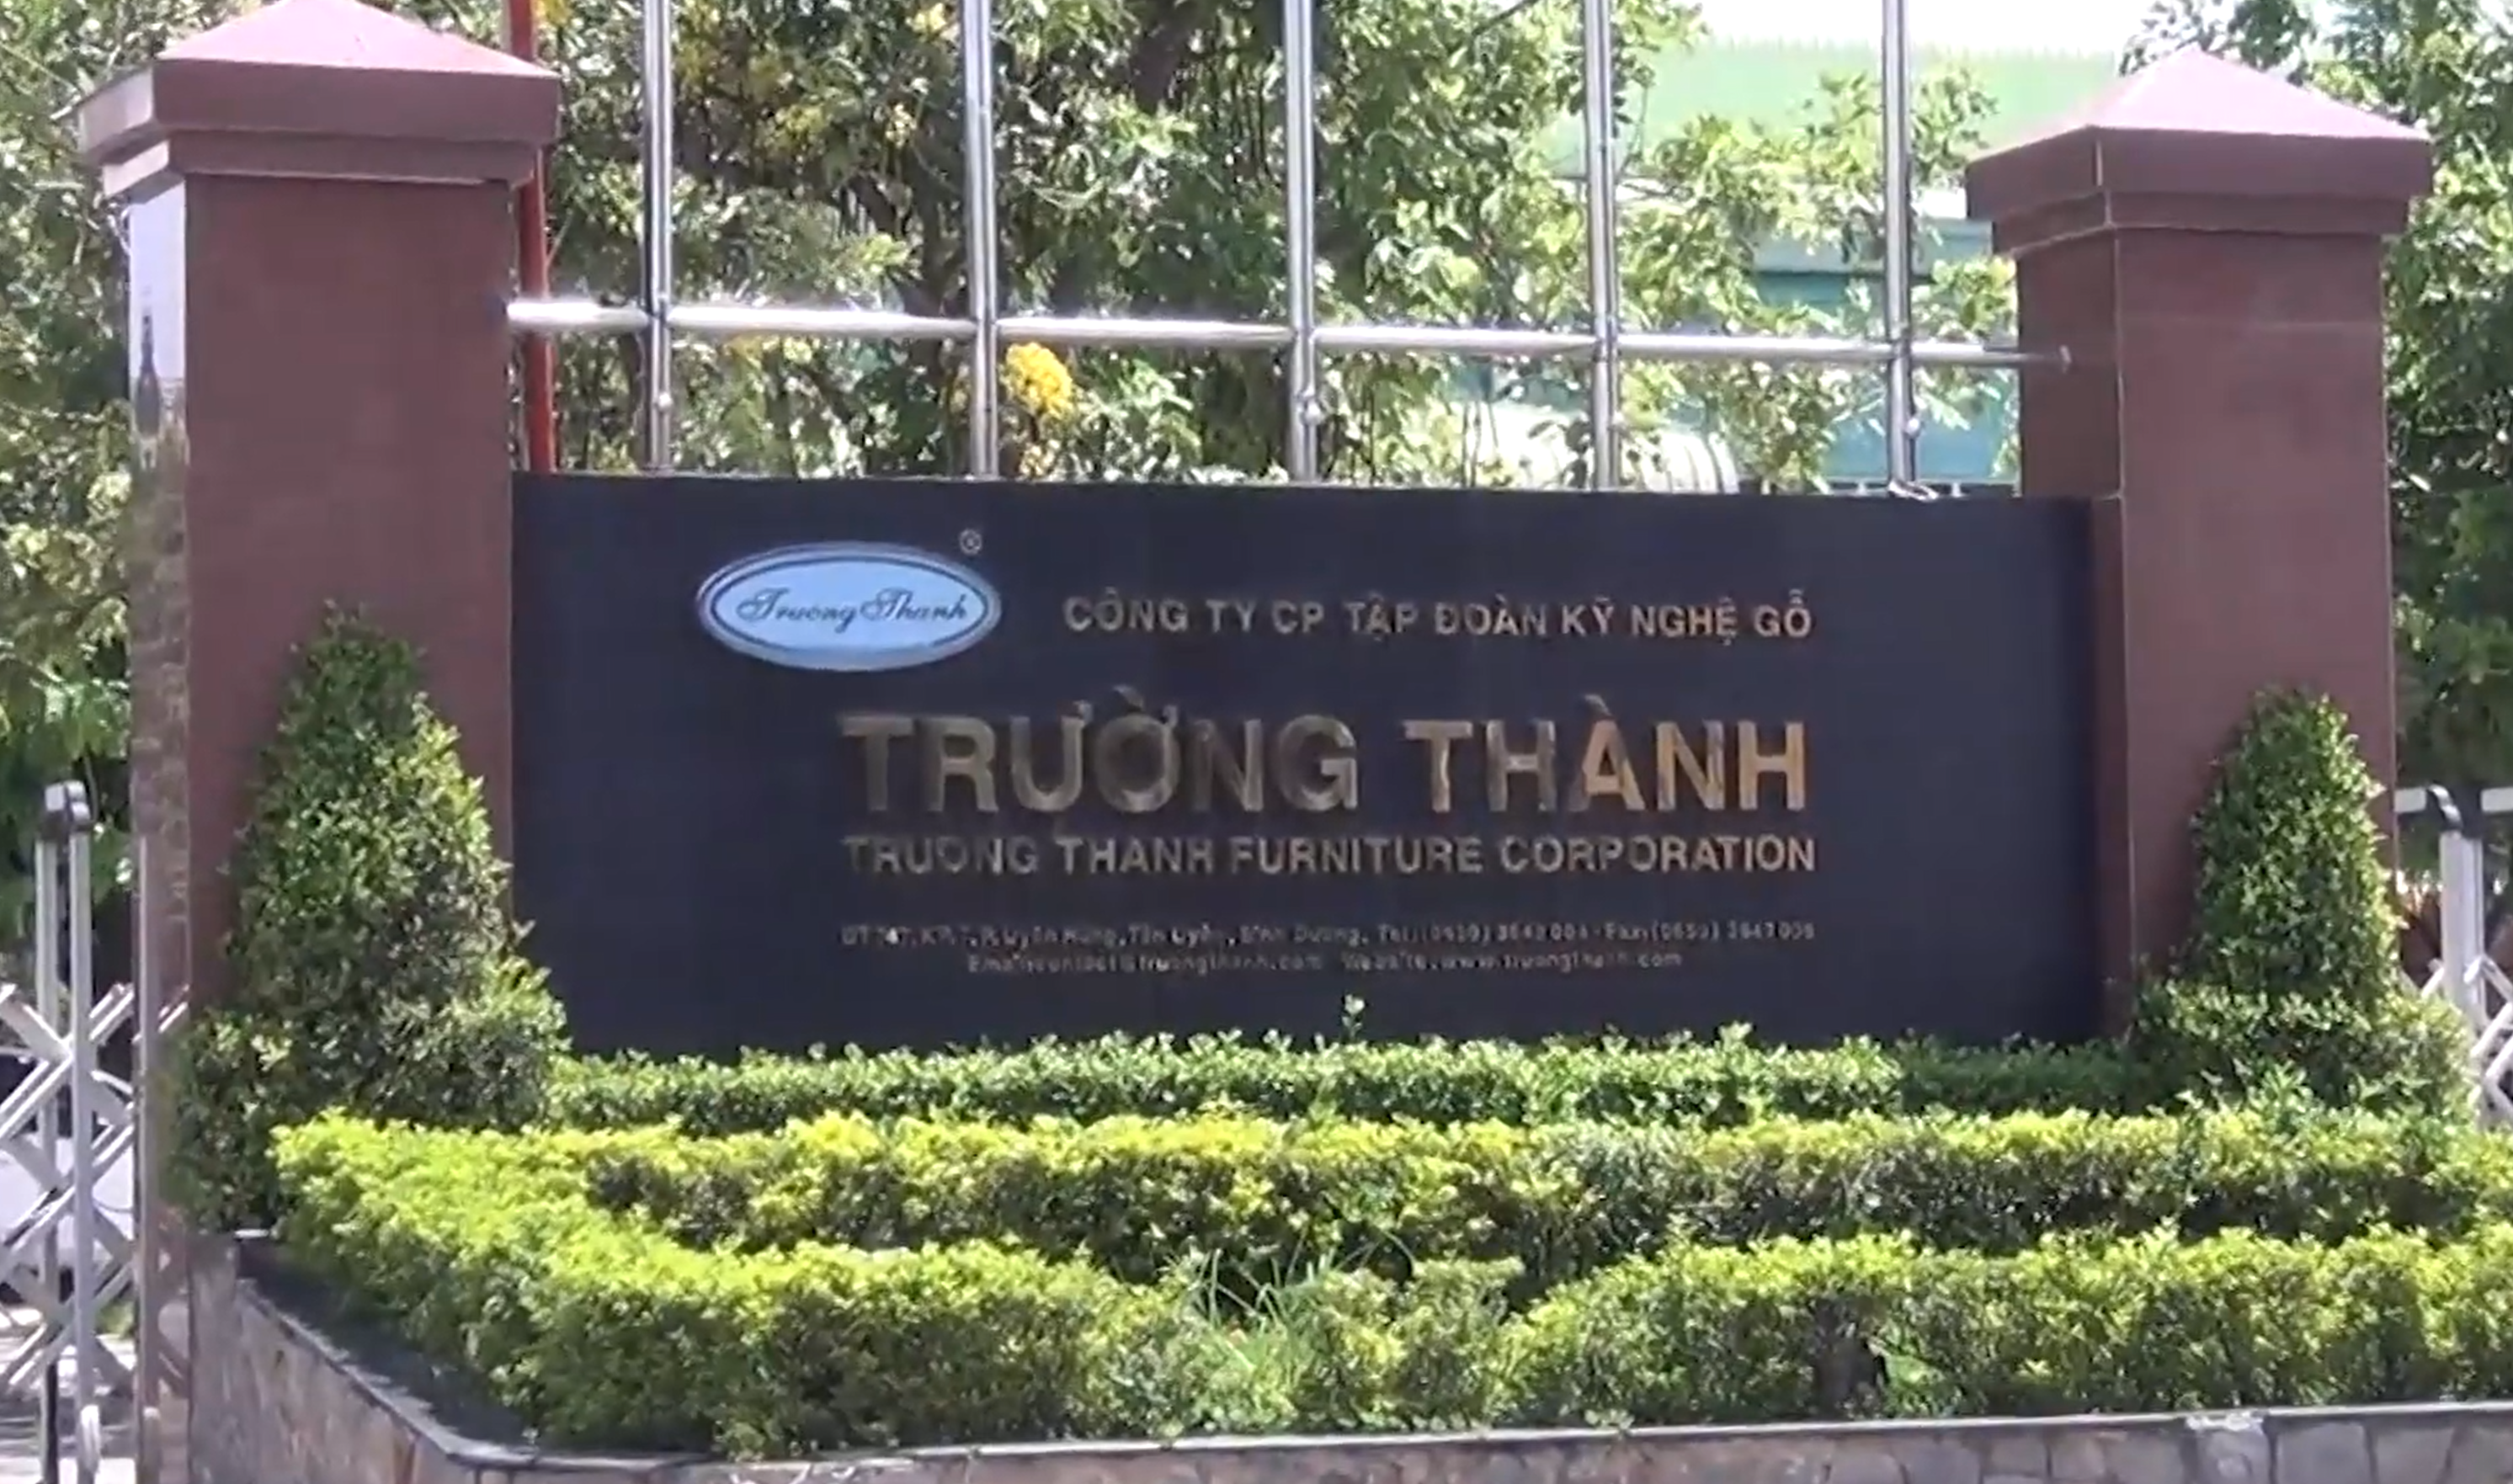 go-truong-thanh-1664185283.png